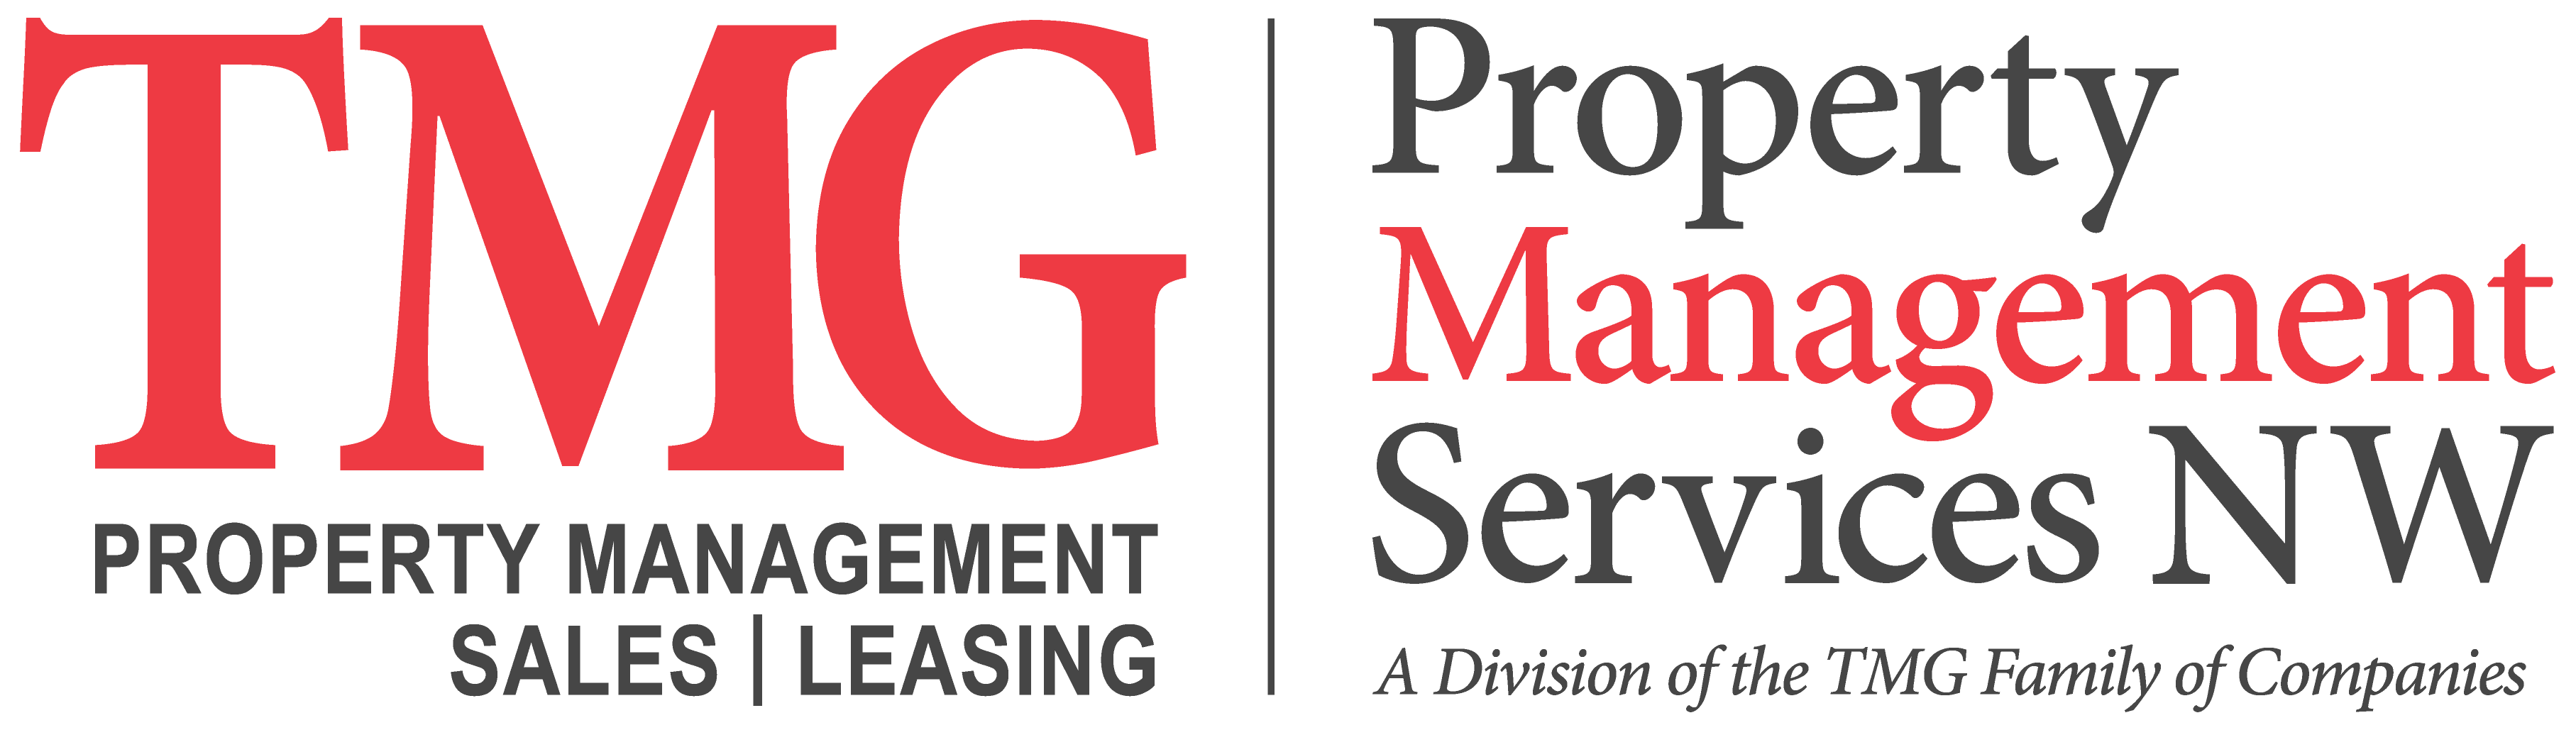 TMG Property Management Services NW